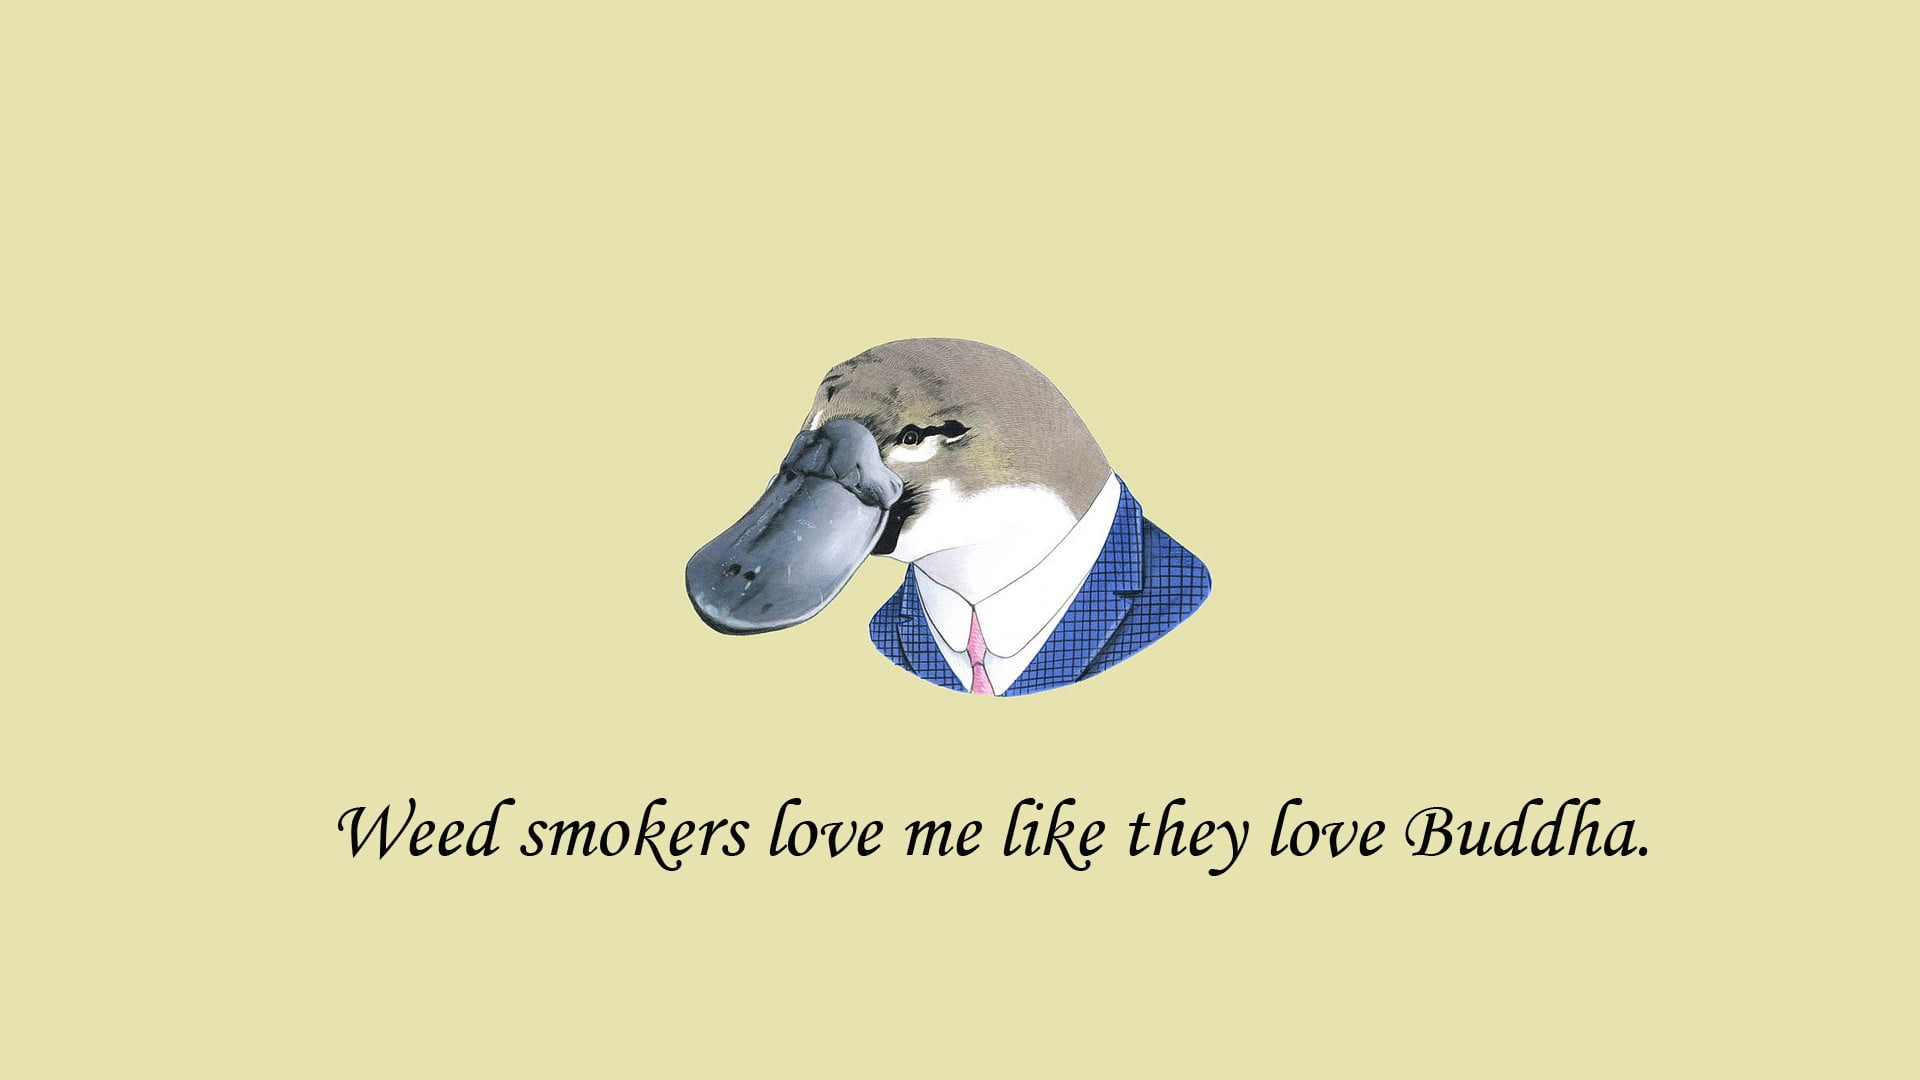 weed smokes love me life they love buddha post, minimalism, simple background, digital art, quote